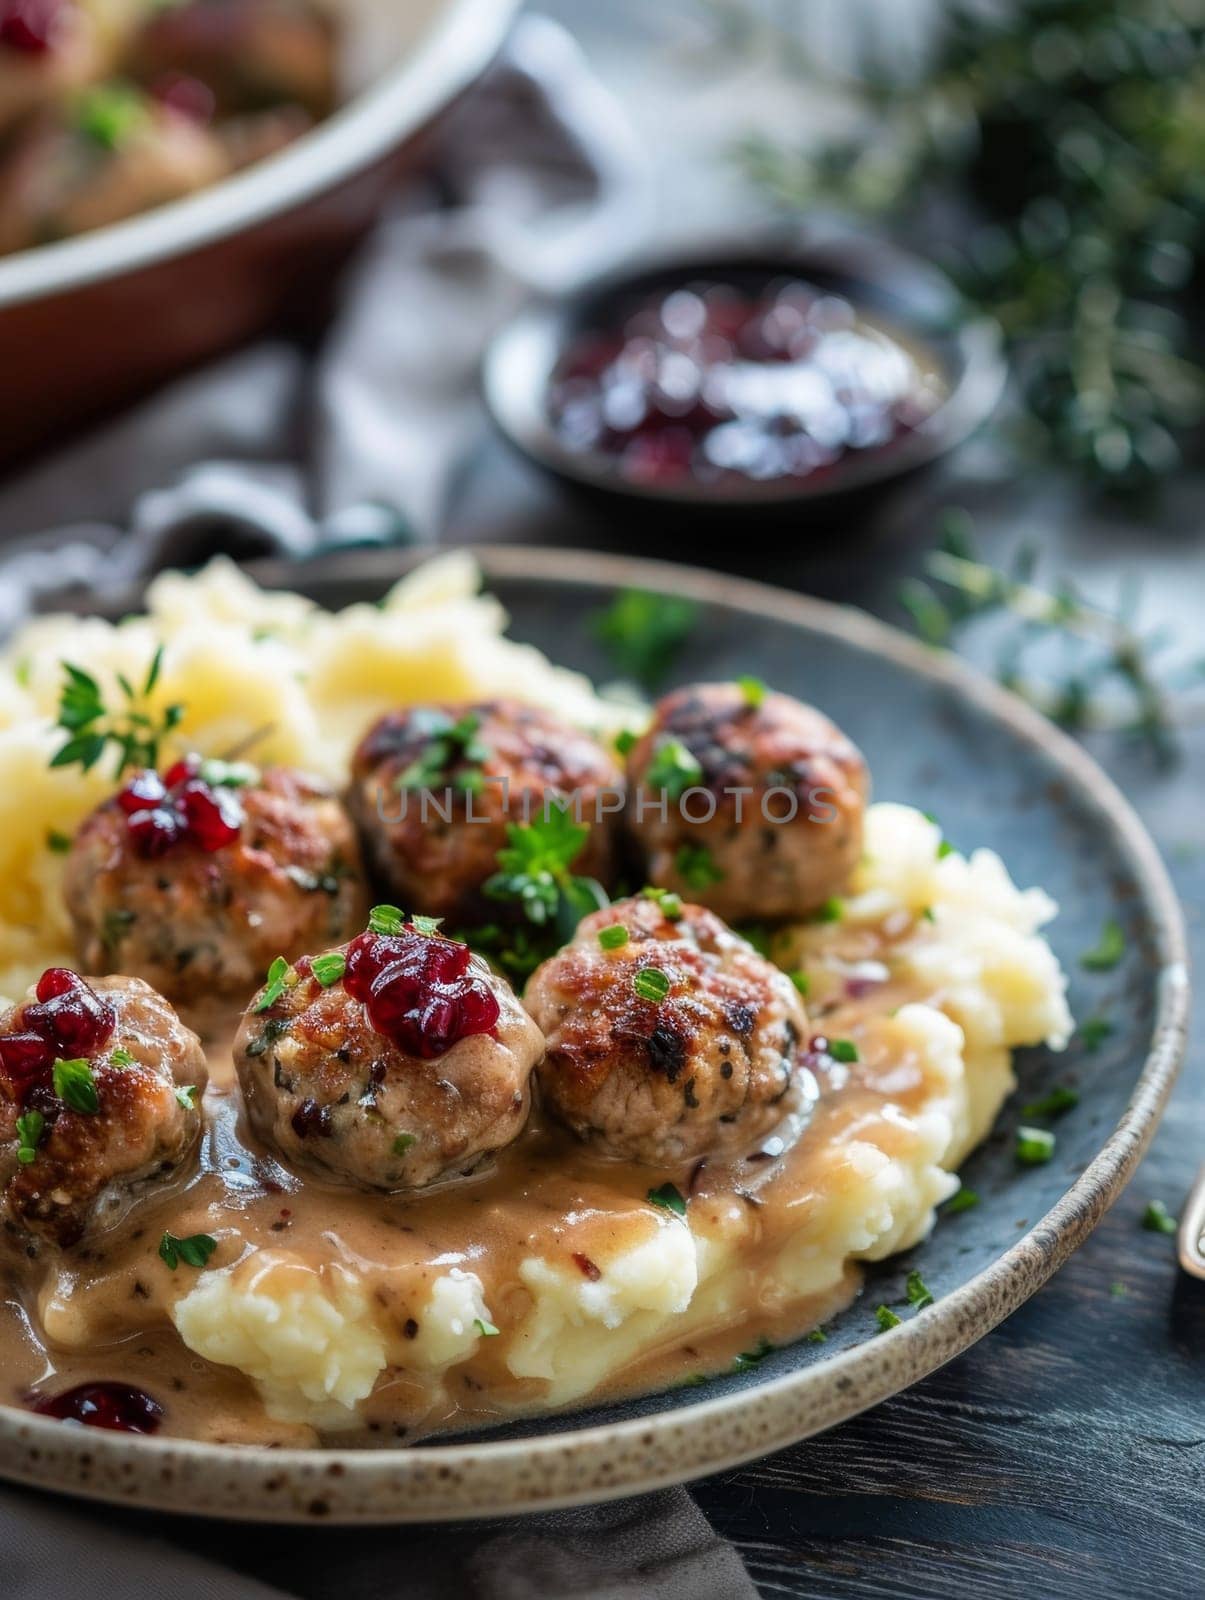 Authentic Swedish meatballs served on a plate with a creamy gravy, accompanied by tangy lingonberry jam and fluffy mashed potatoes - a comforting, traditional dish of Swedish cuisine. by sfinks